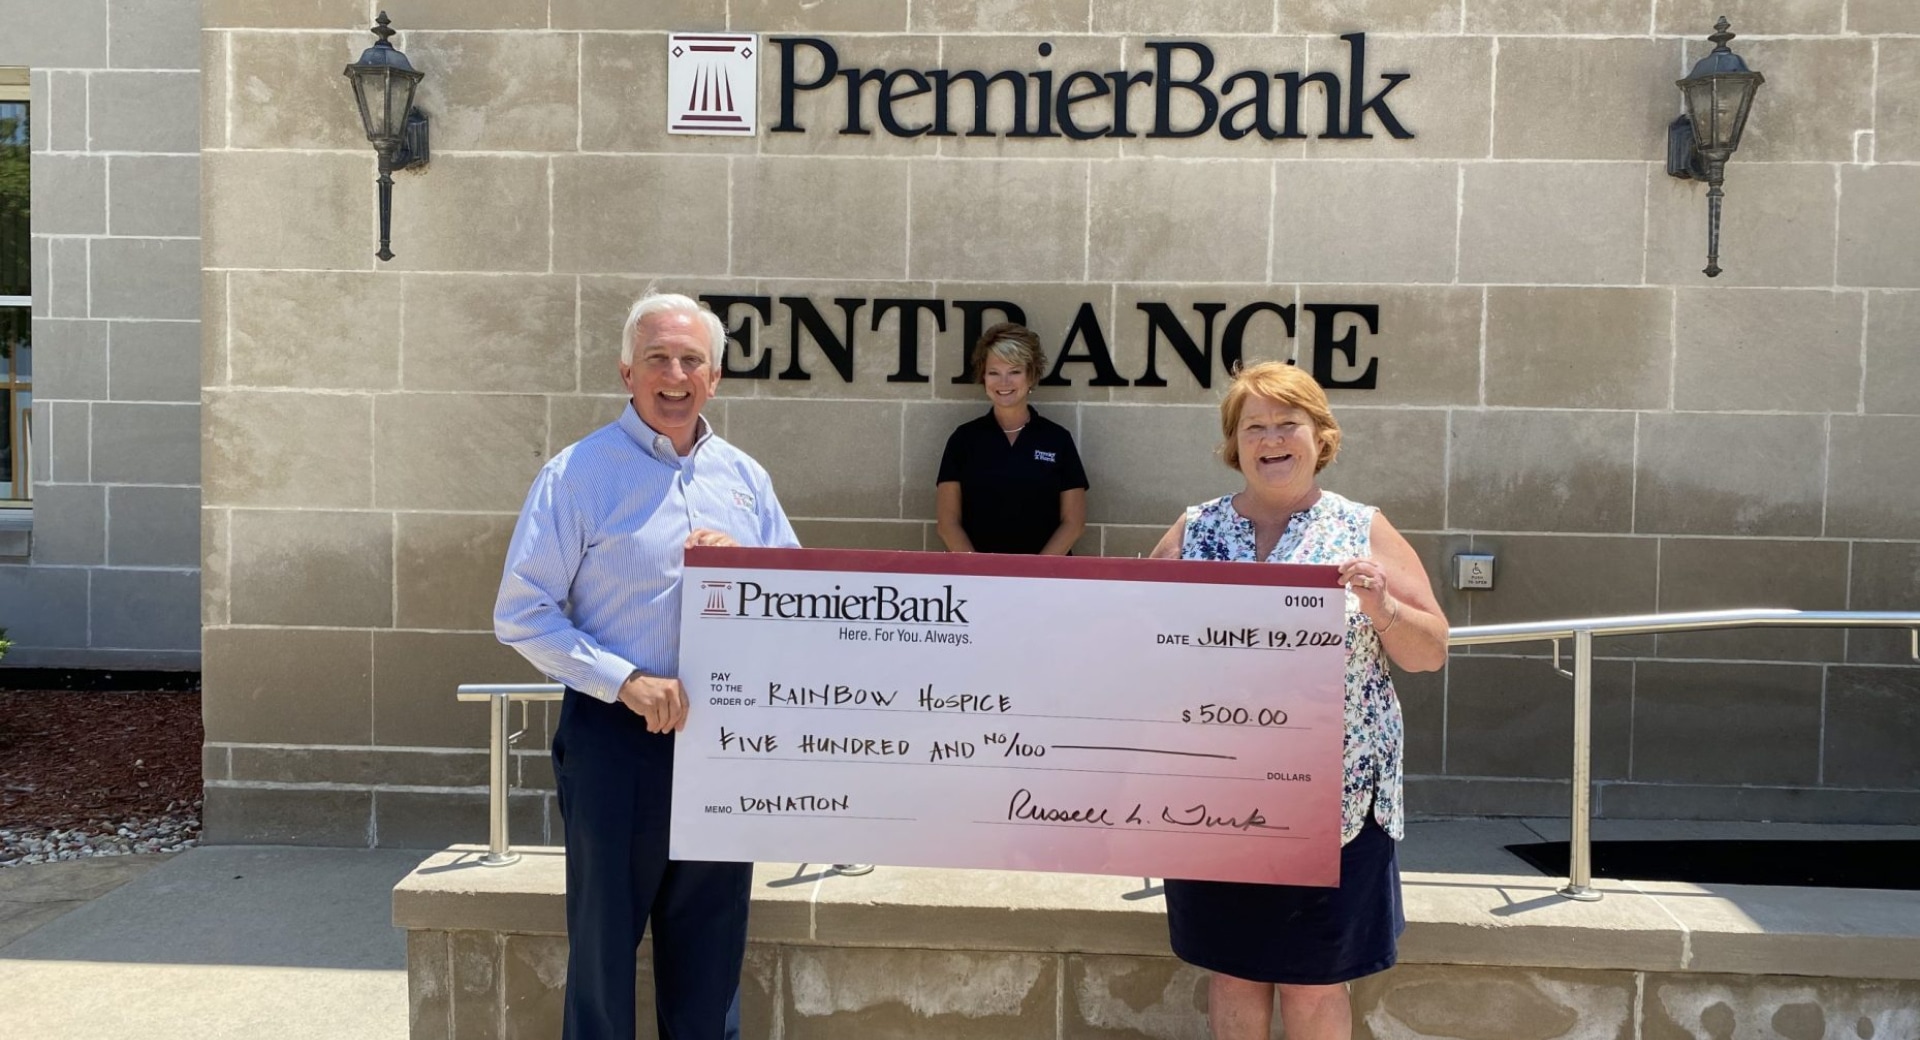 Rainbow Hospice Care Receives Generous Donation From PremierBank